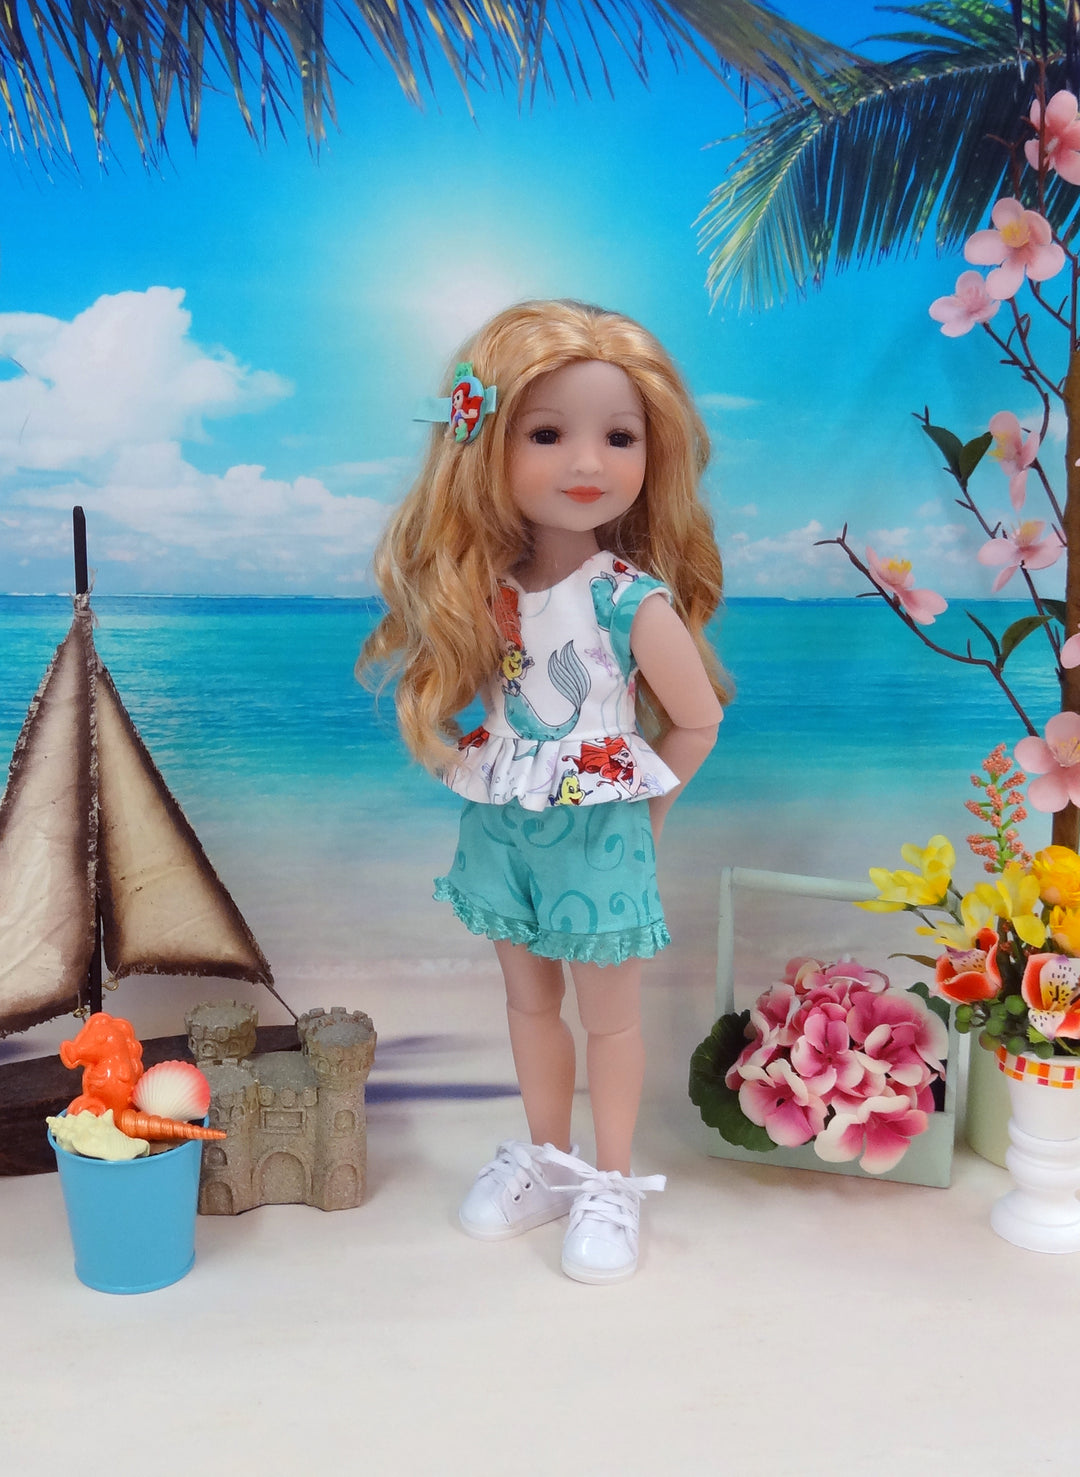 Little Mermaid - top & shorts for Ruby Red Fashion Friends doll